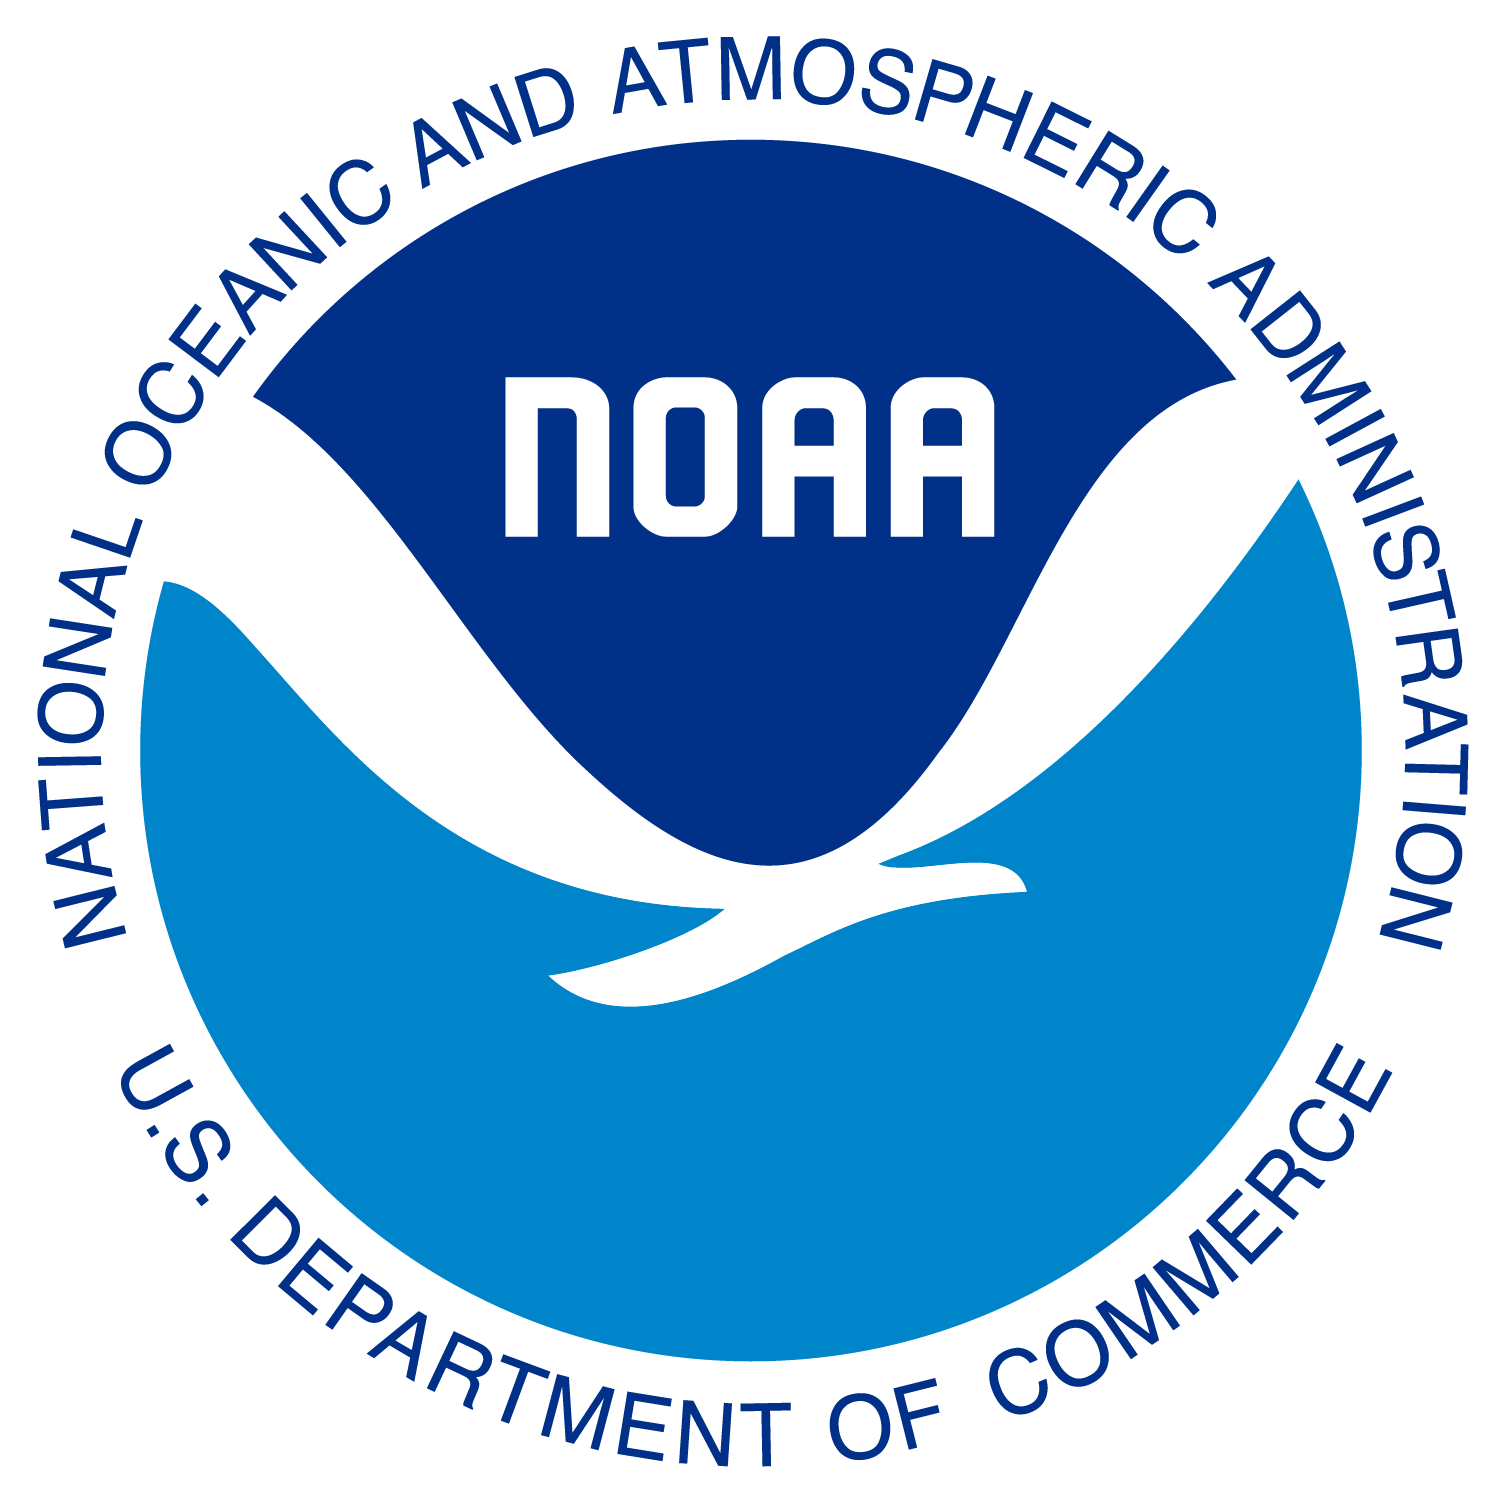 Official NOAA emblem: A white gull-like form separates a dark blue field that represents the sky from a lighter blue field that represents water. A "NOAA" wordmark, made of white custom text, is placed in the dark blue field. The text "National Oceanic and Atmospheric Administration U.S. Department of Commerce" circumscribes the image on a white background. 